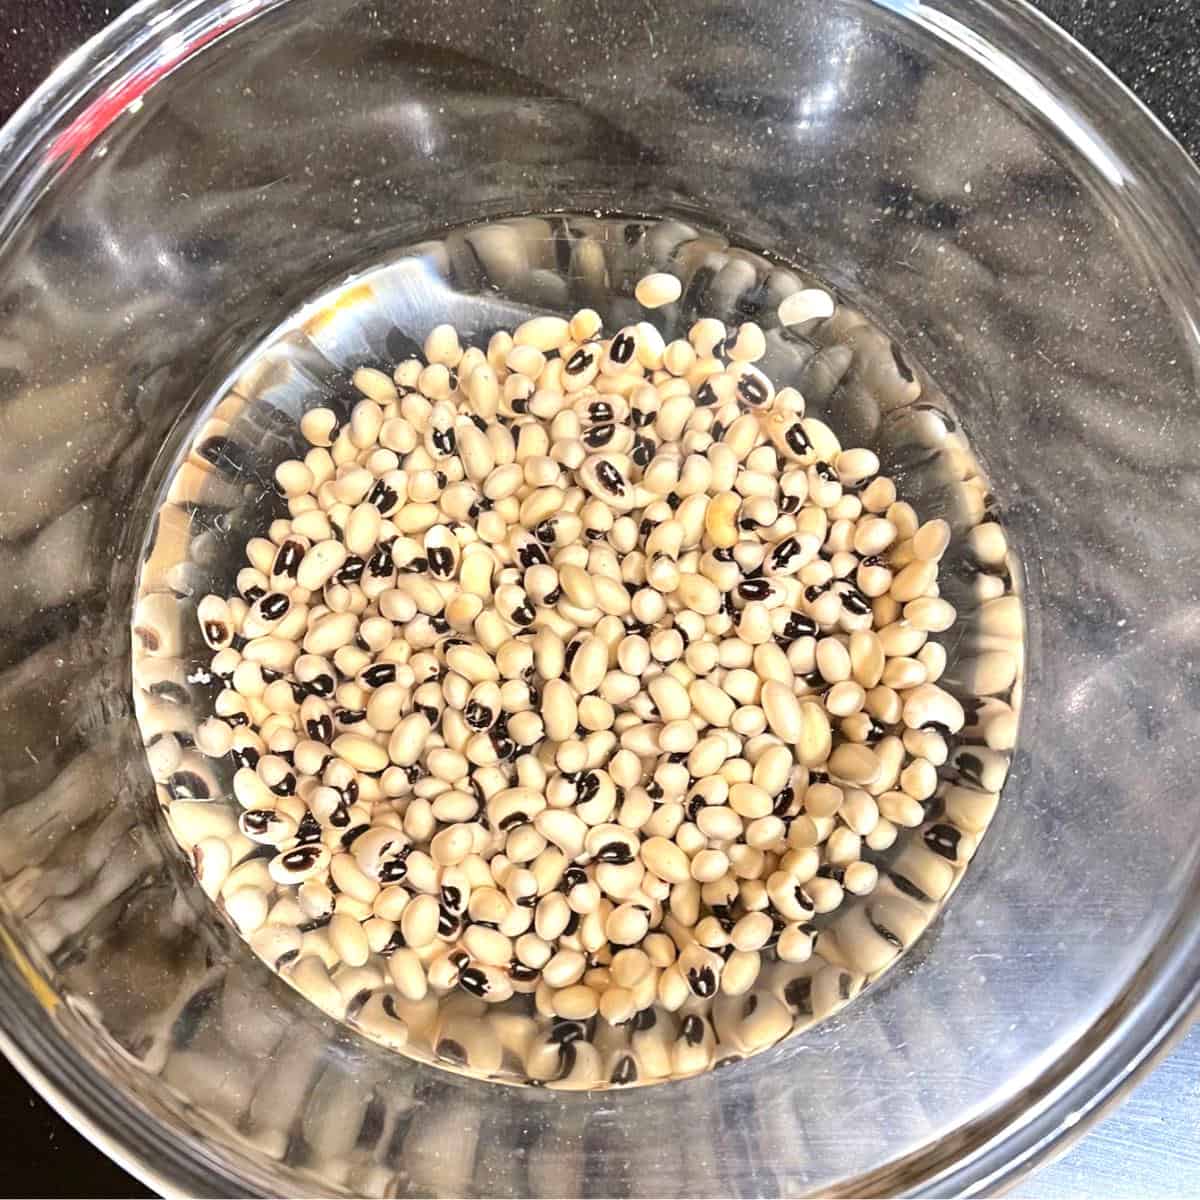 Black-eyed peas after soaking for 6-8 hours in bowl.